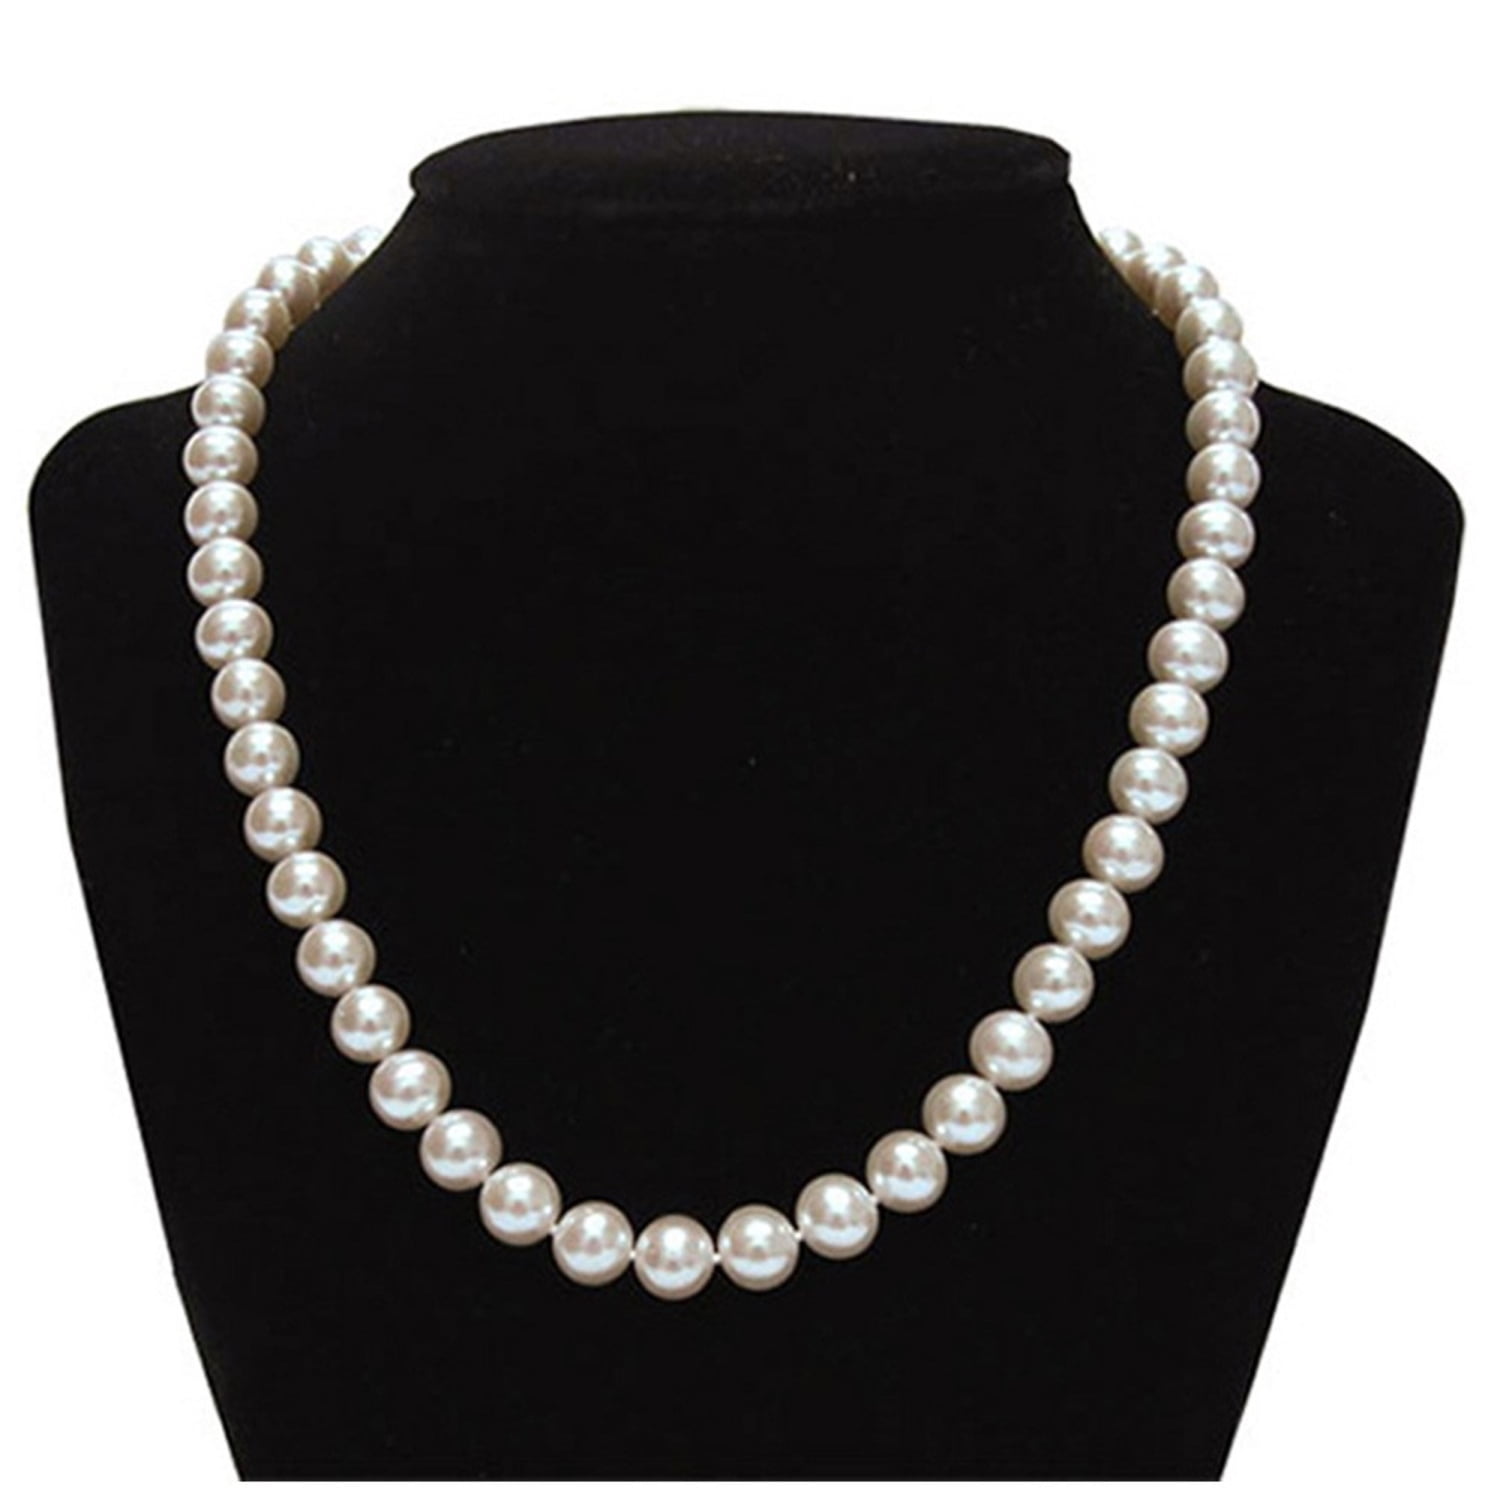 Single White 7-8mm A Quality Freshwater 925 Sterling Silver Cultured Pearl Necklace For Women 